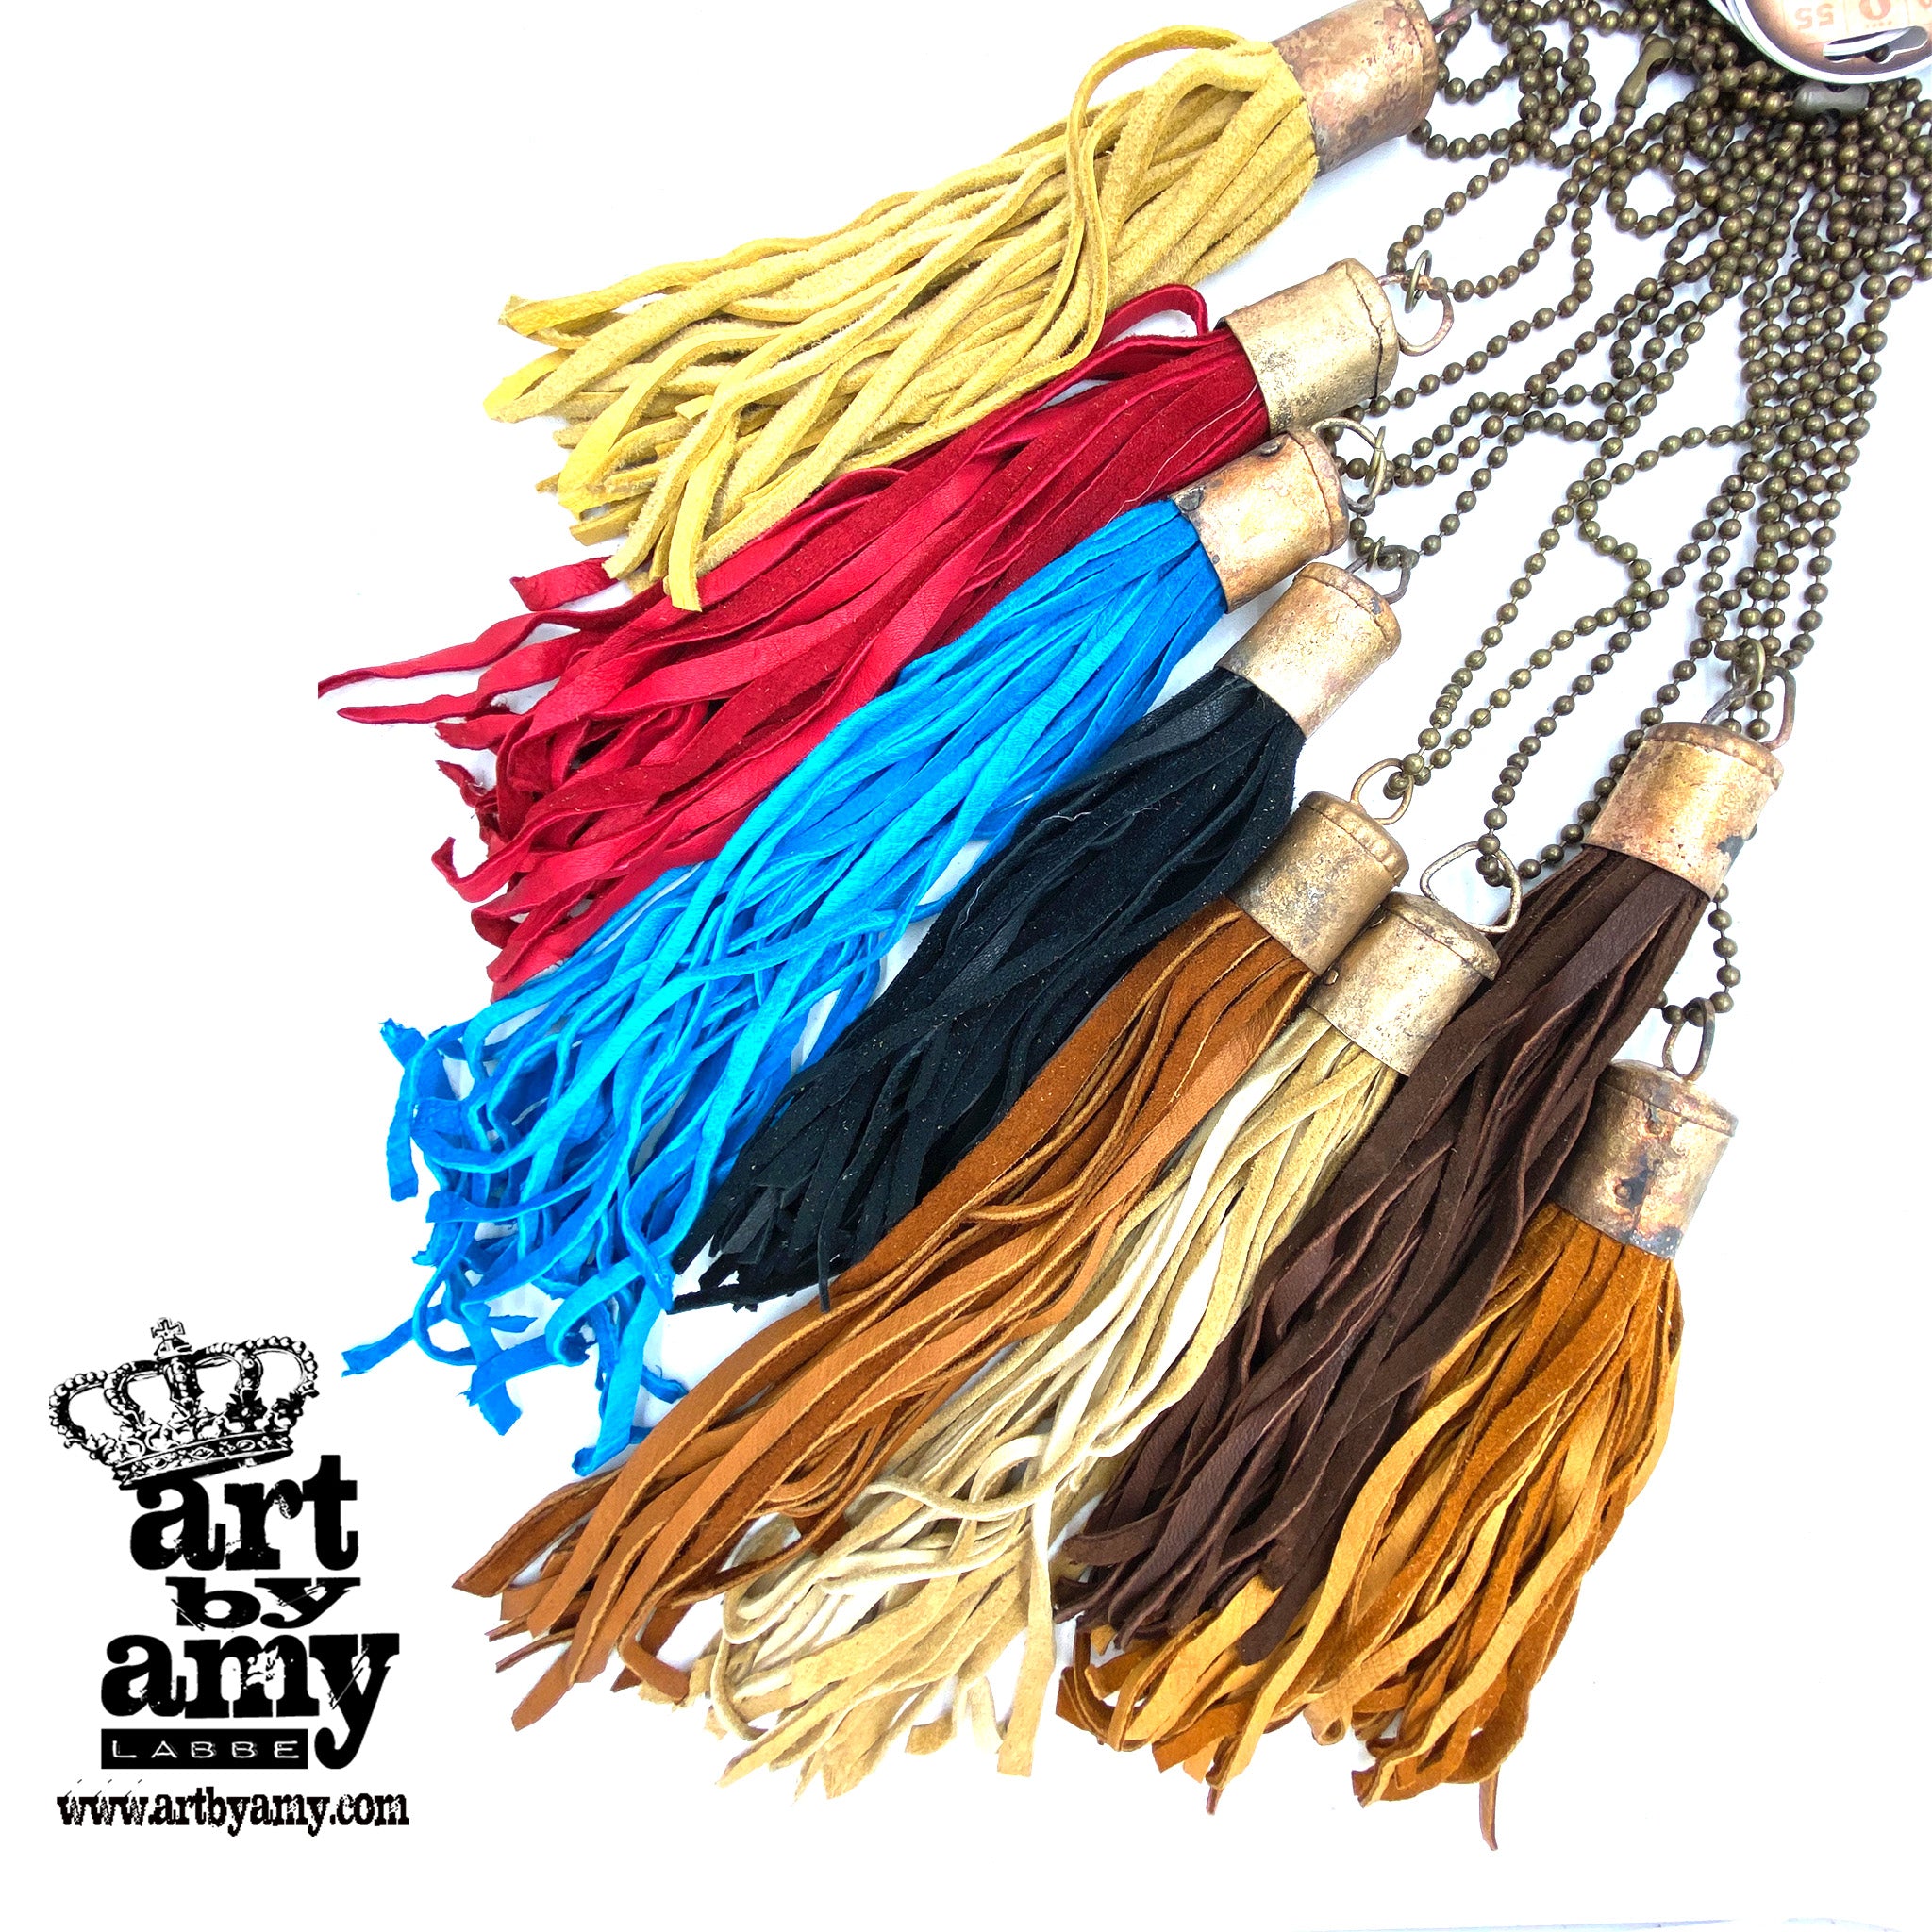 lindsaystreemdesigns Bag Charm Tassel - 3.5 Small Faux Leather Tassel on Clip Antique Gold / Warm Brown